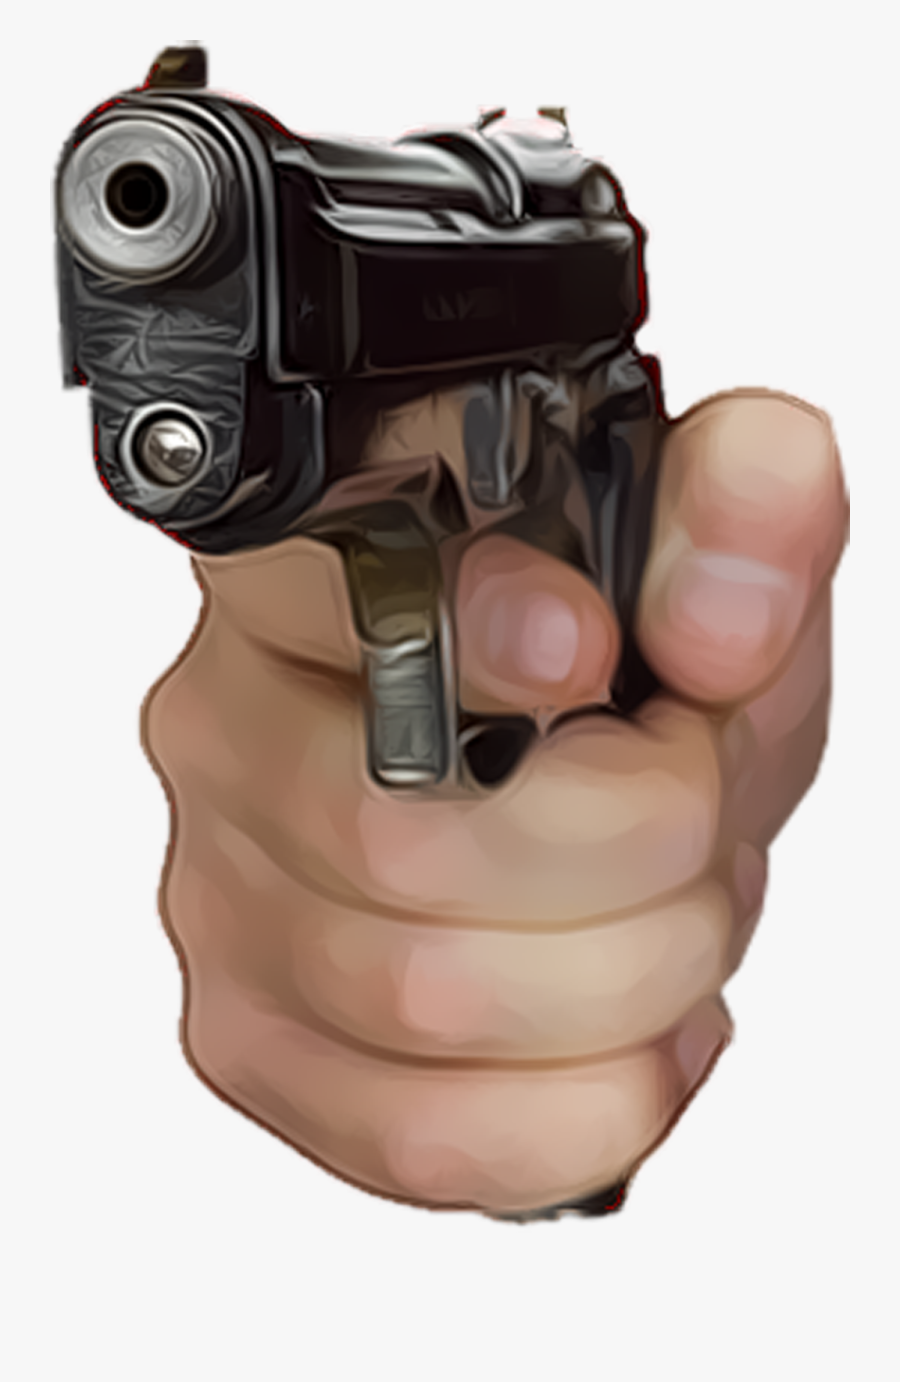 Hd Image Transparent Free - Hand With Gun Png, Transparent Clipart